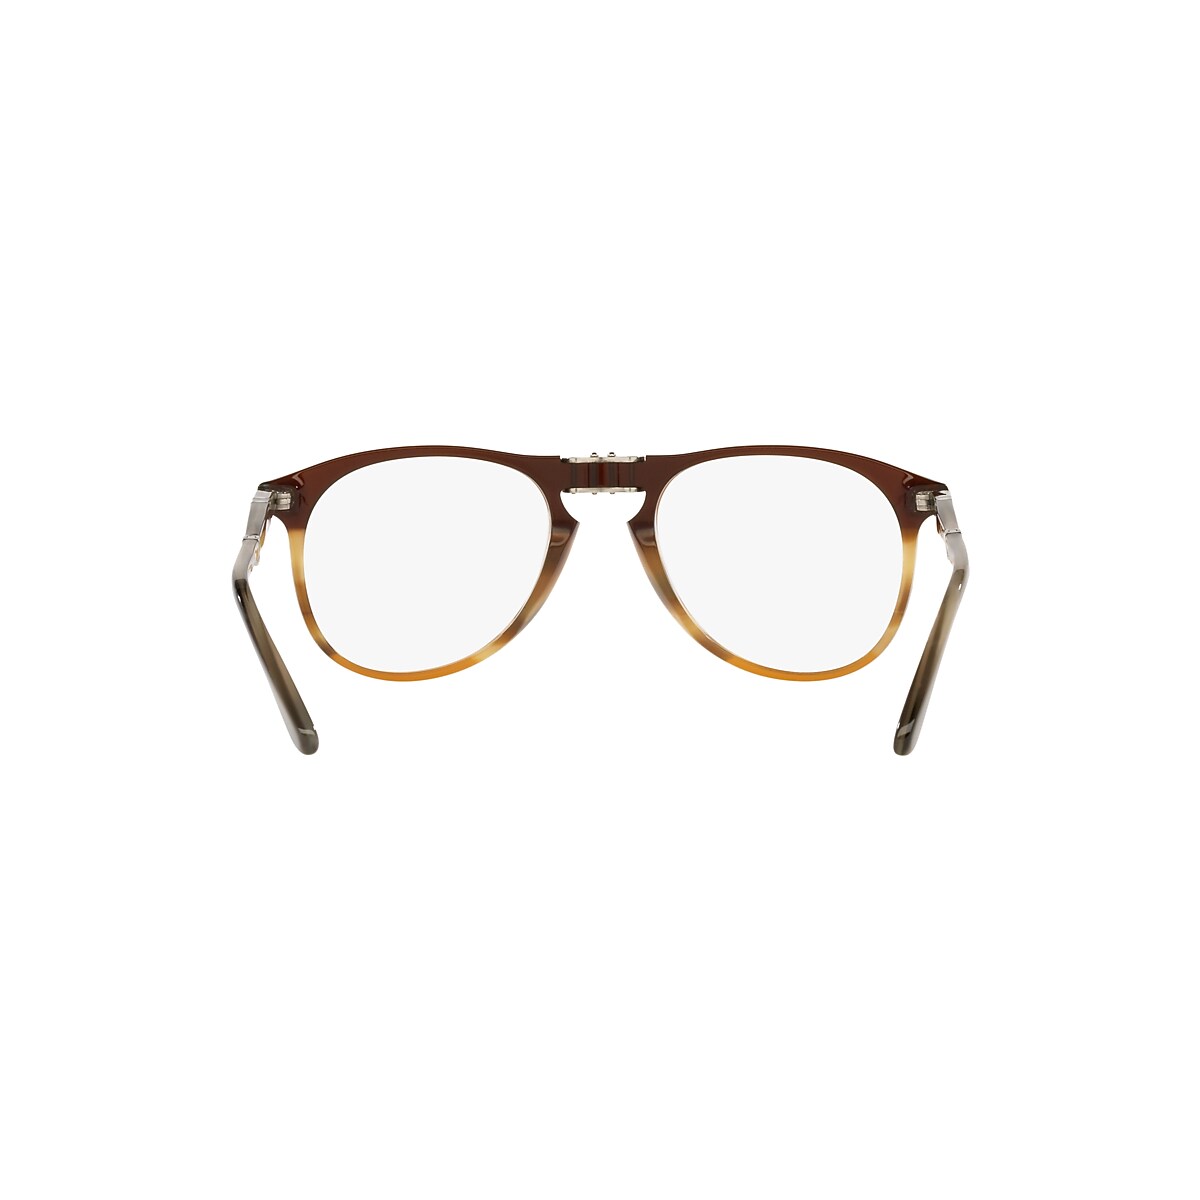 https://assets.persol.com/is/image/Persol/8056597553896_180A.png?impolicy=SEO_1x1